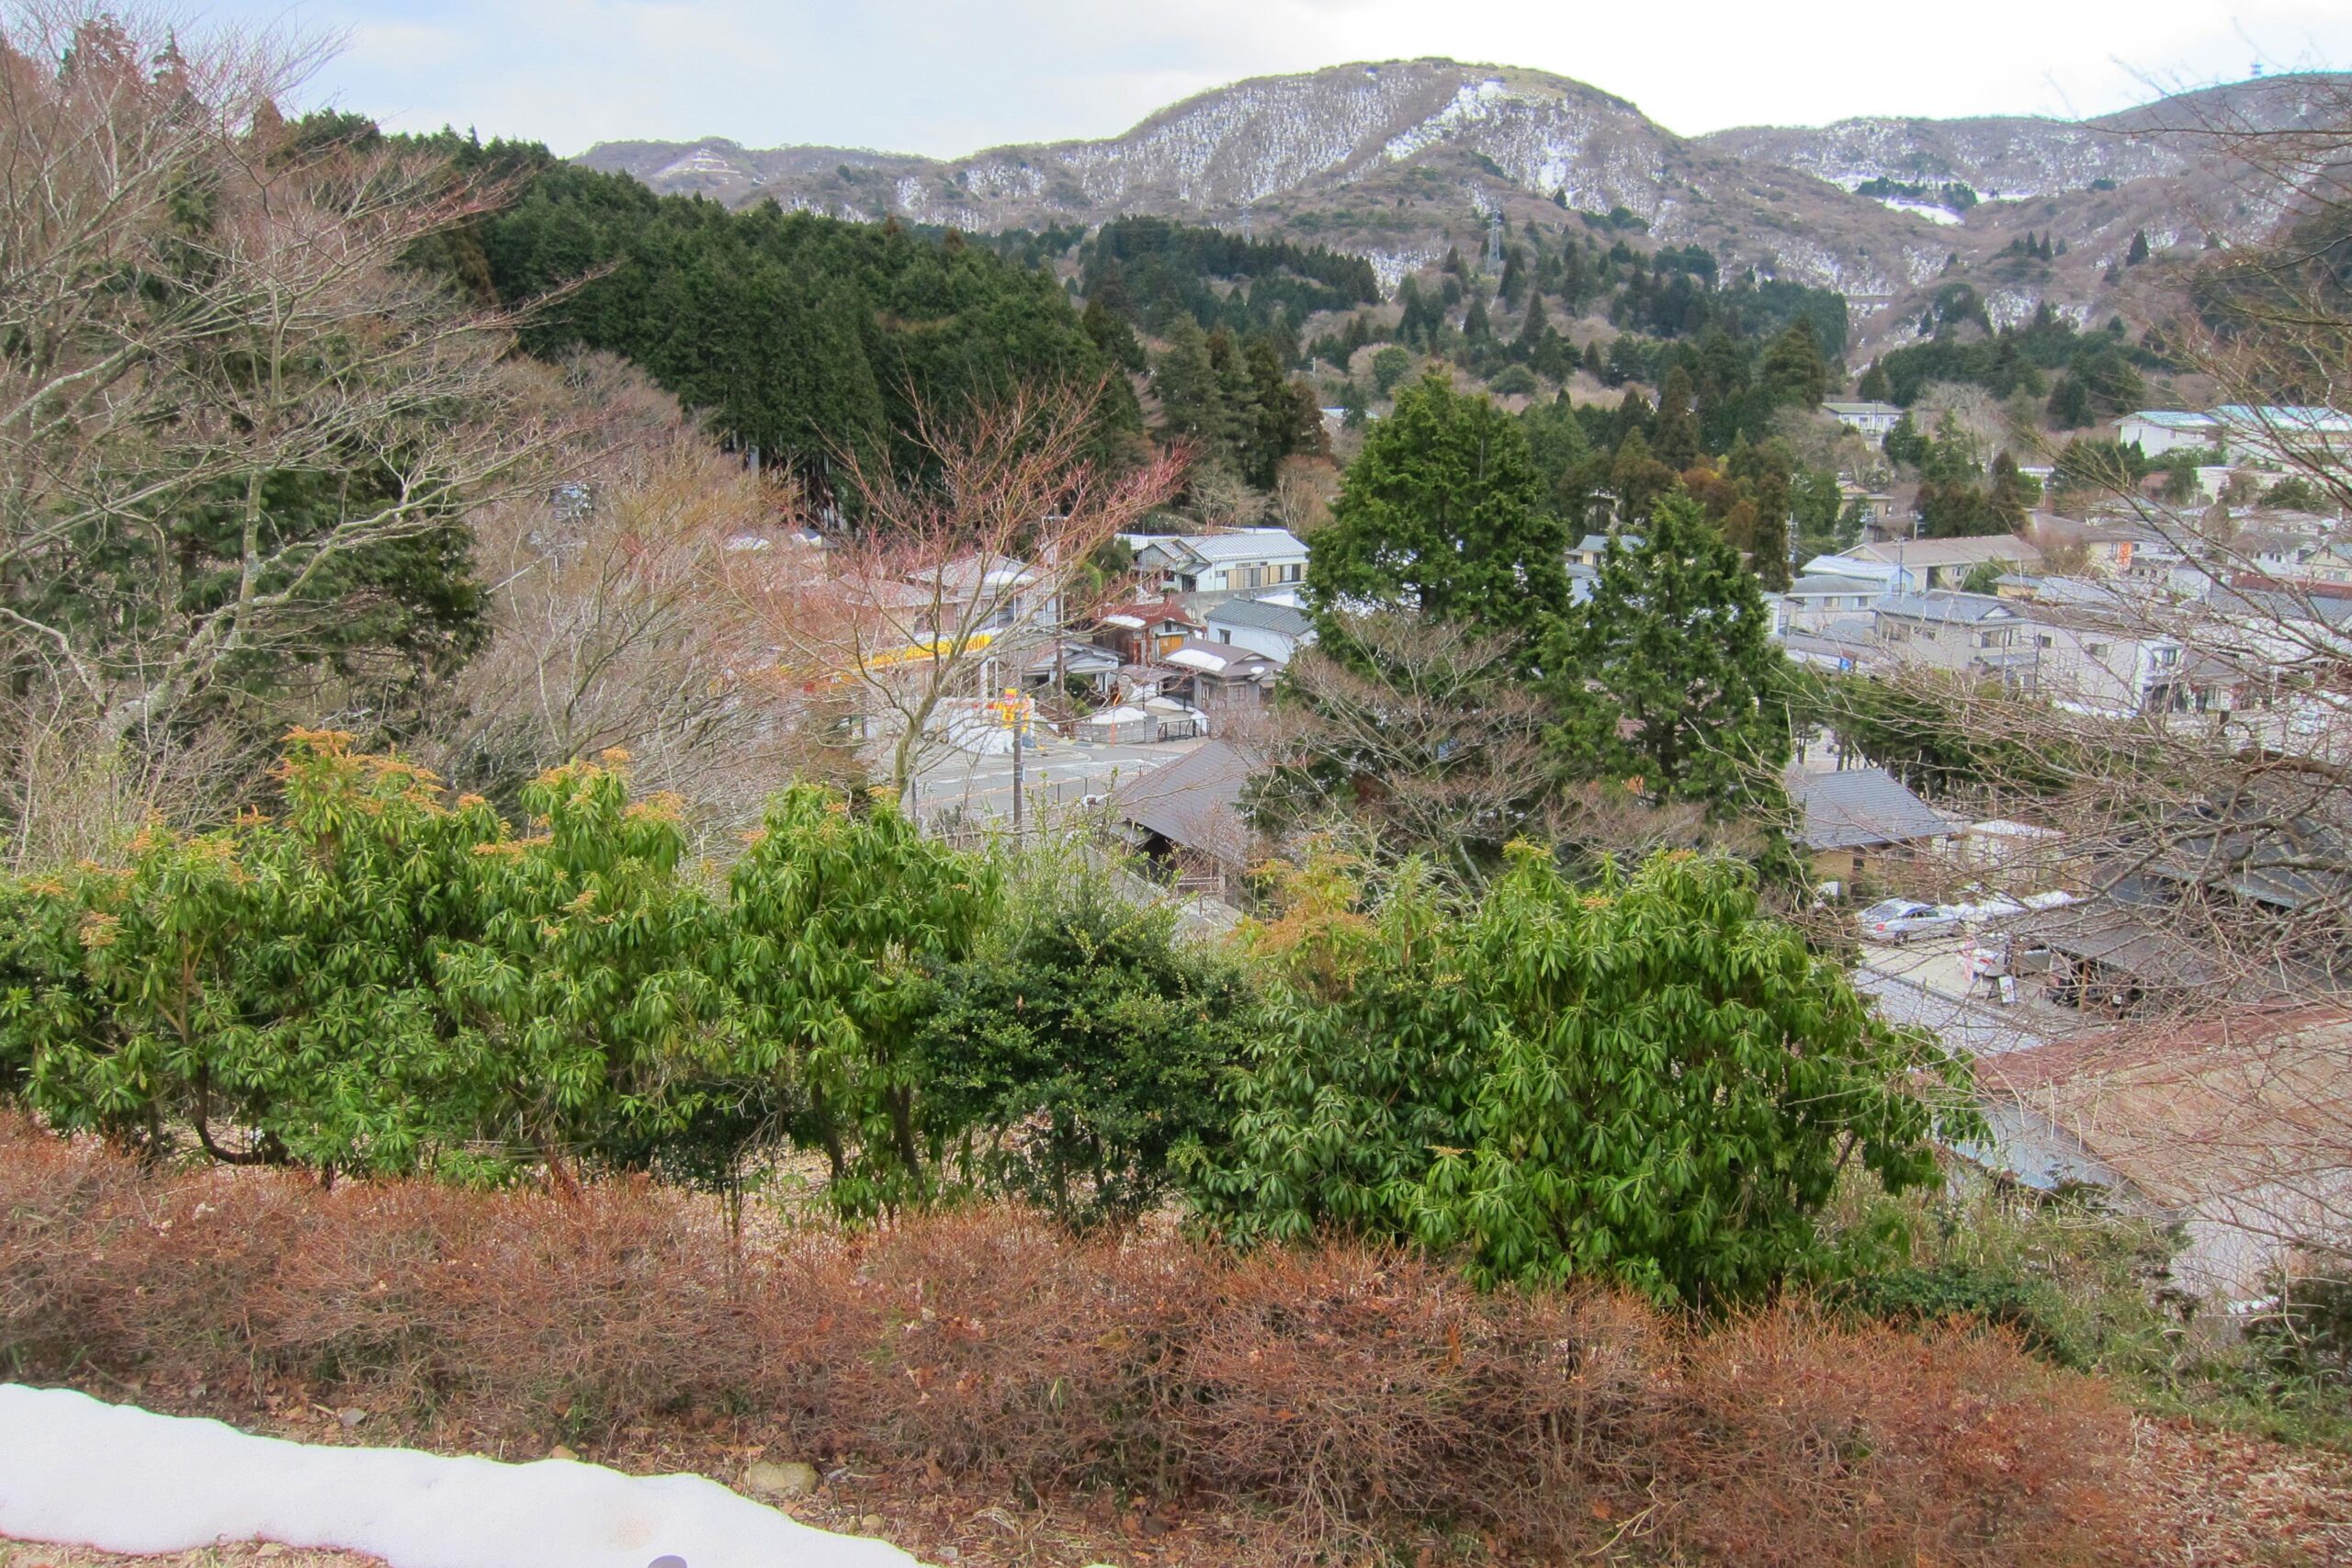 View of houses nestled under the mountains in Hakone